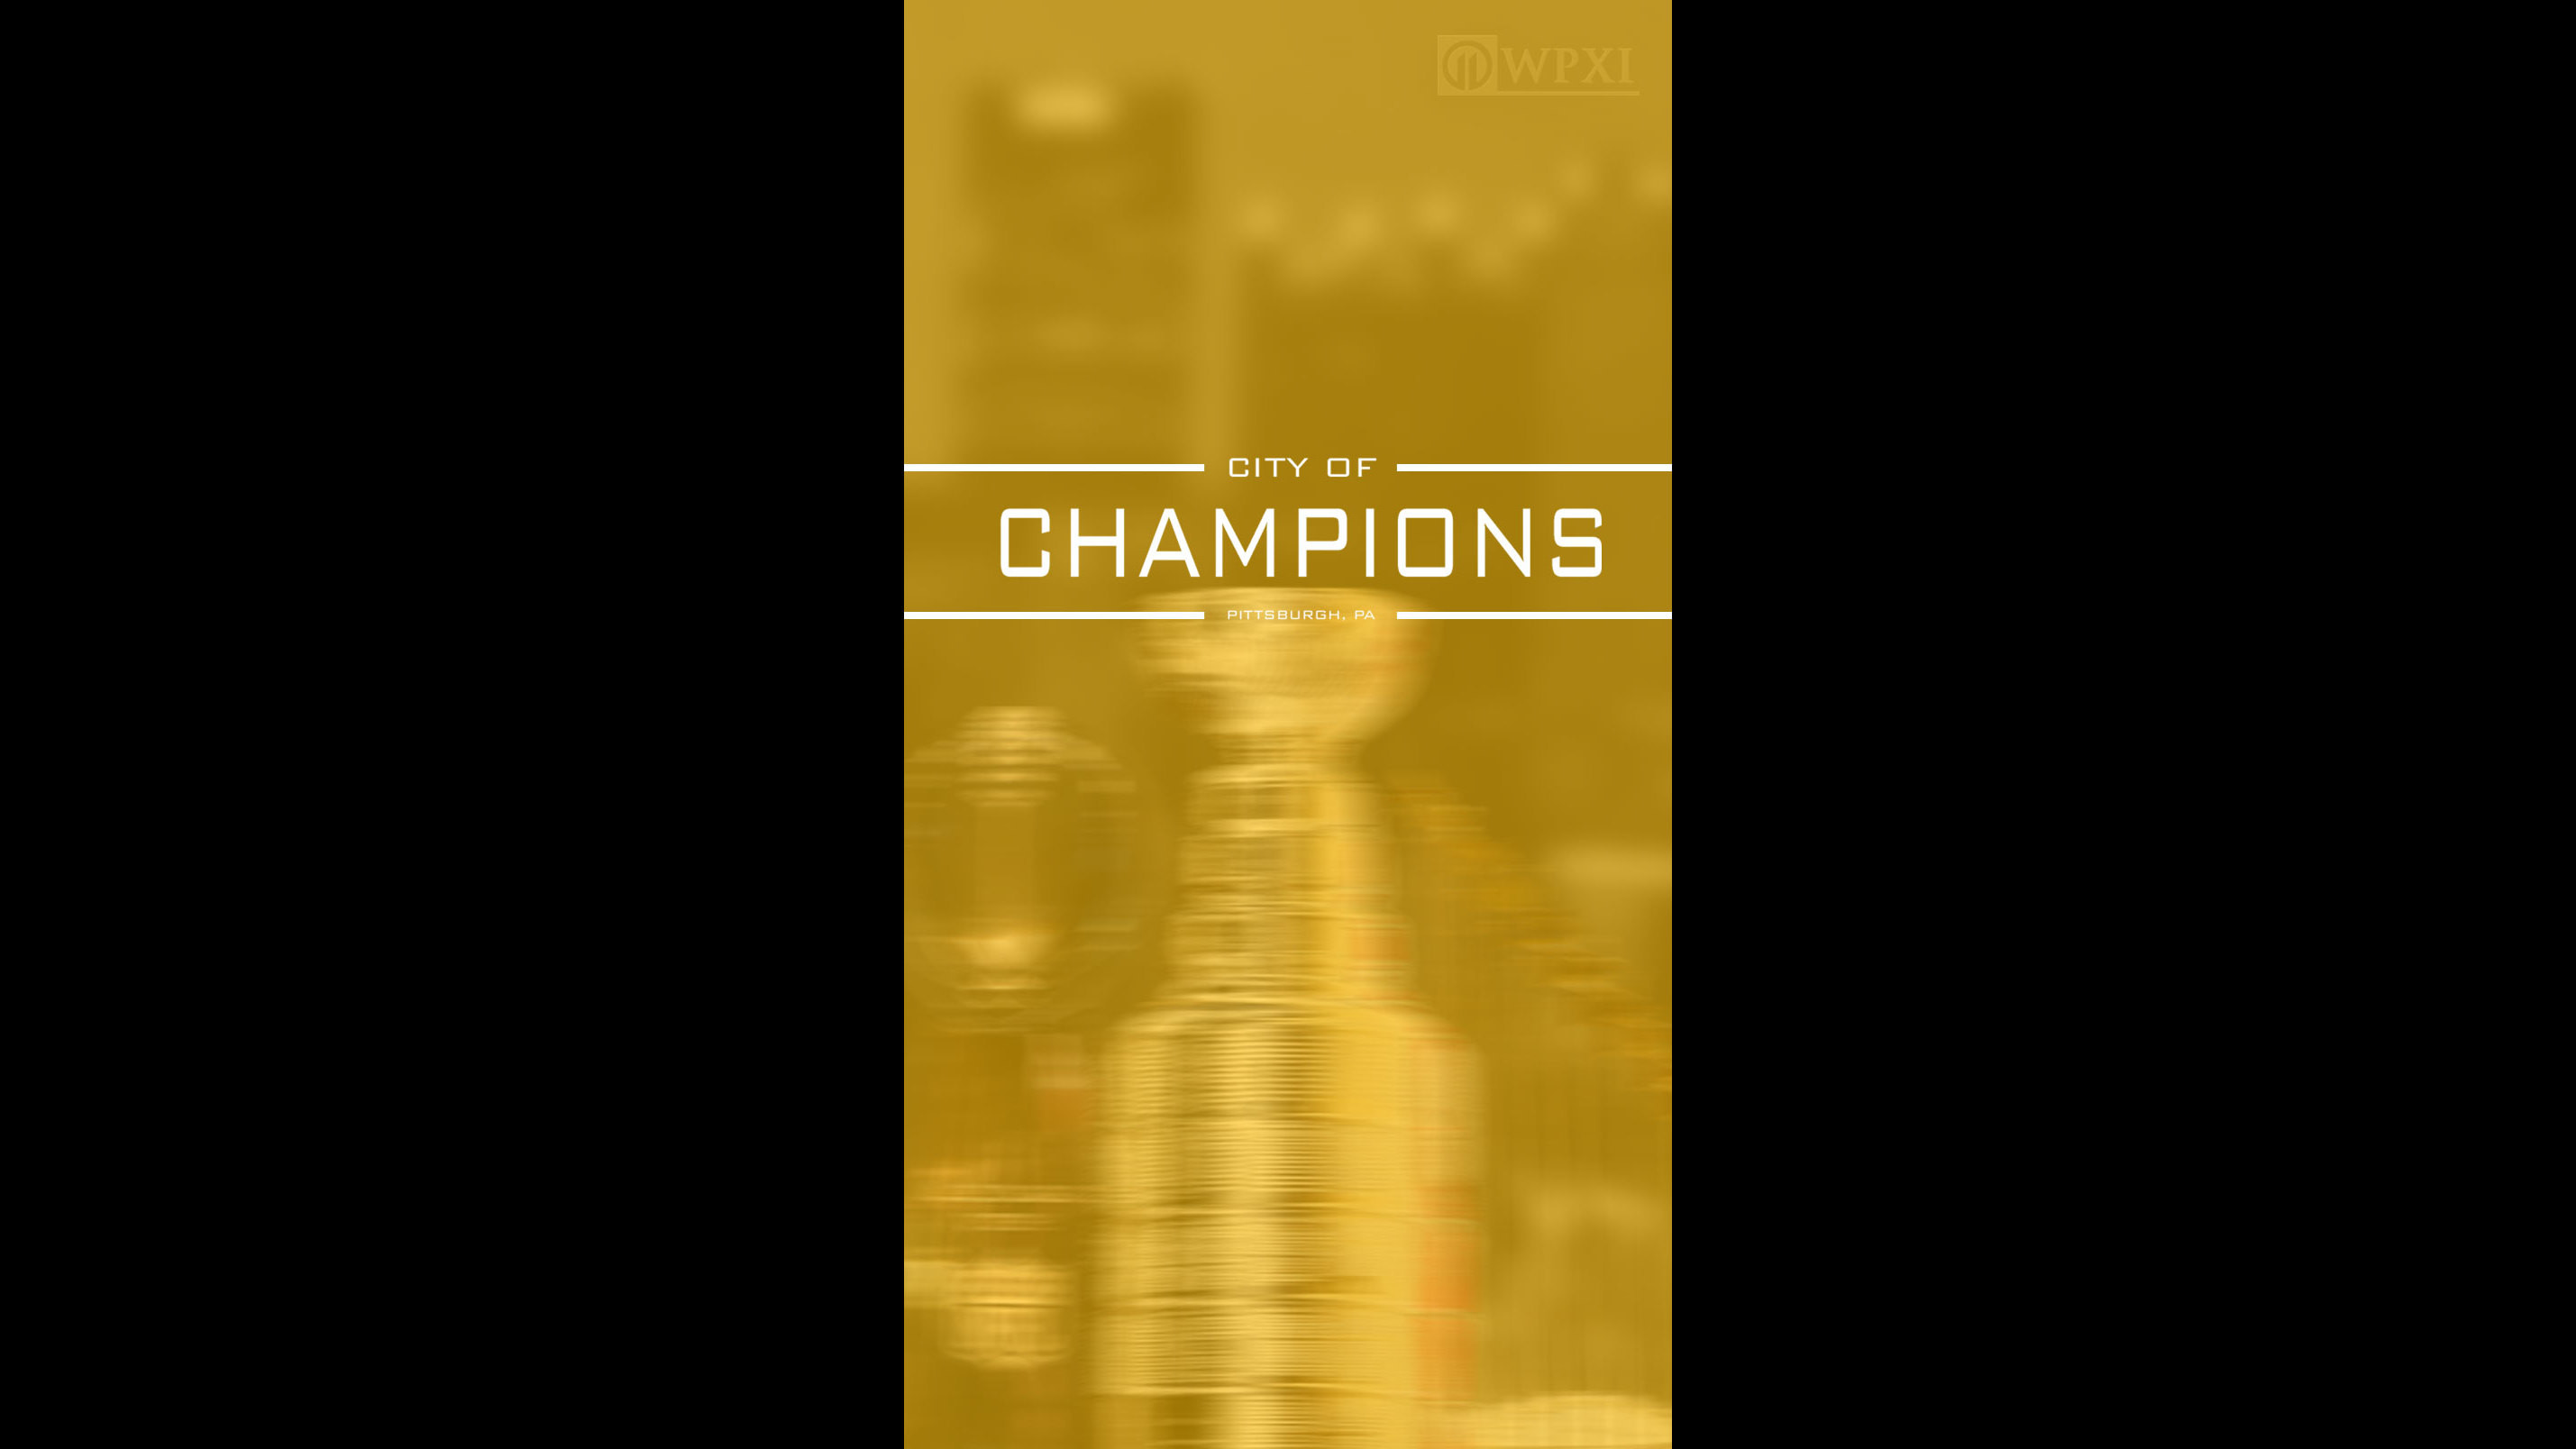 Show Your Pittsburgh Pride With City Of Champions Wallpaper - Book Cover - HD Wallpaper 